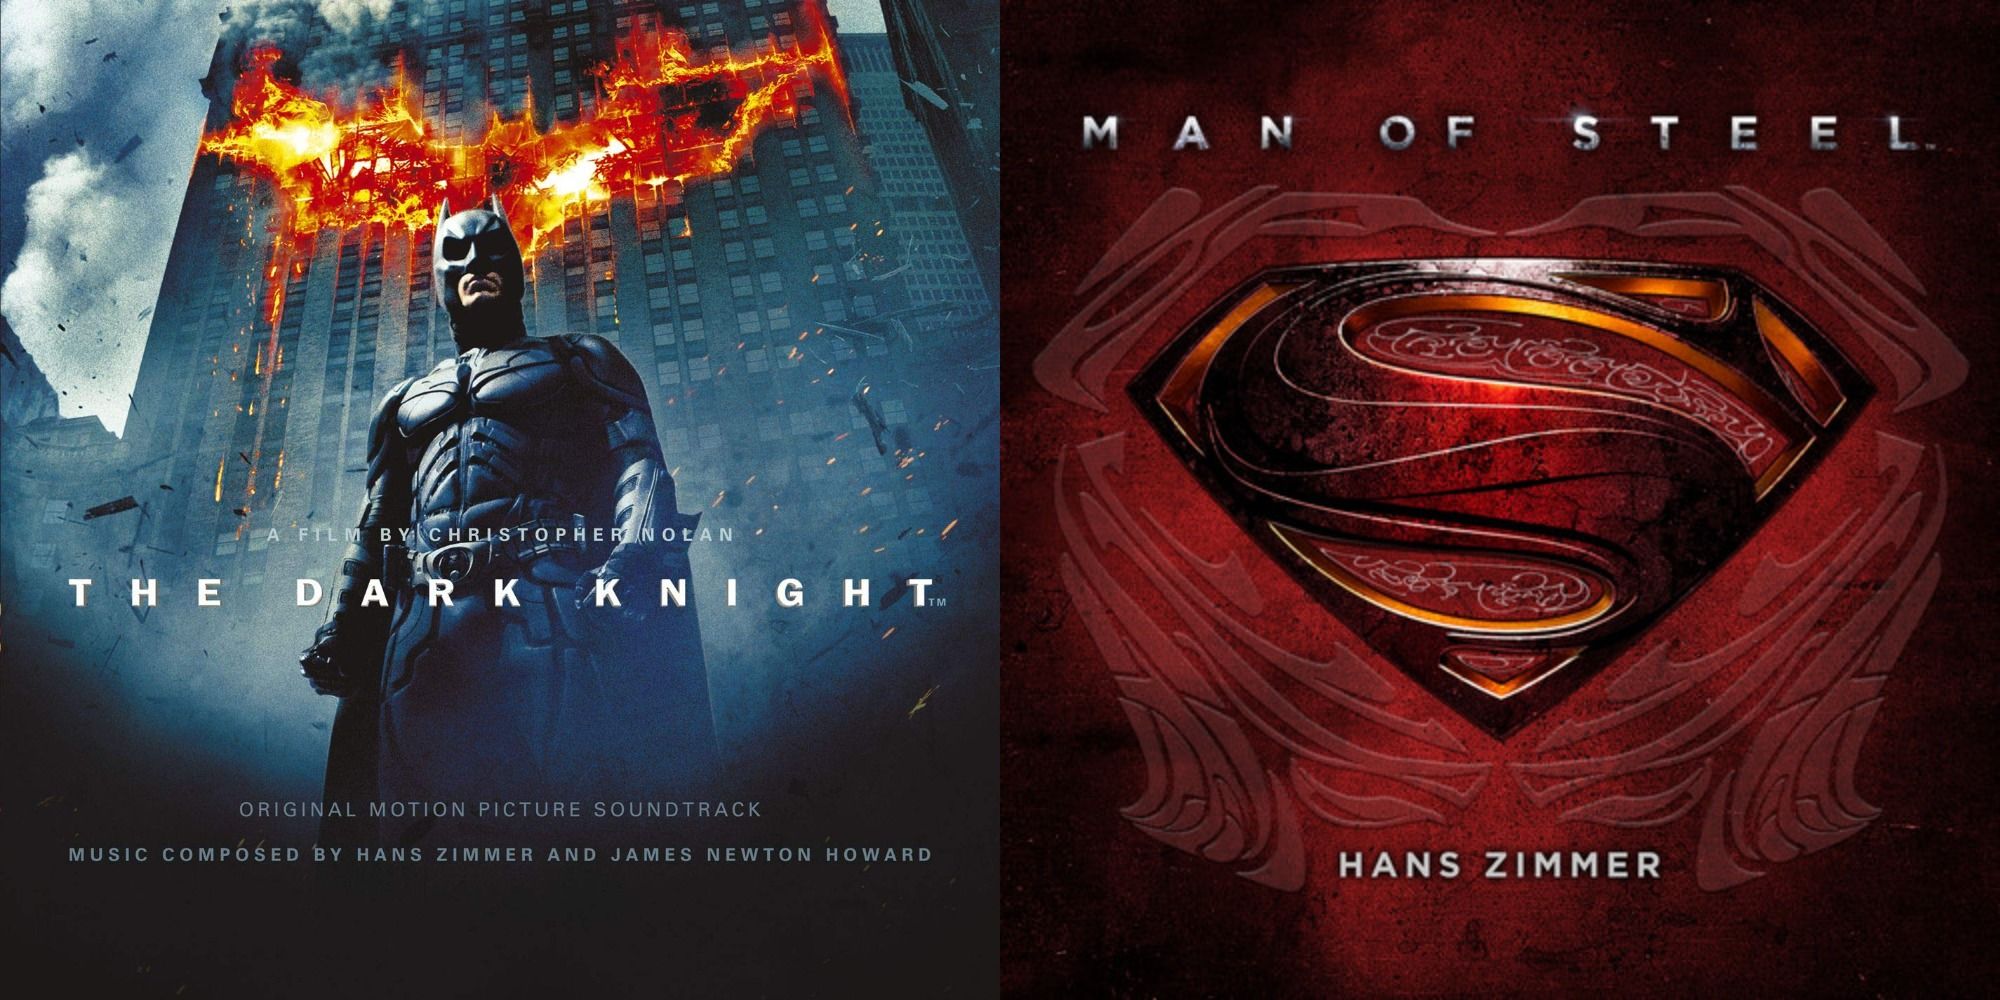 The covers to the scores for The Dark Knight and Man of Steel